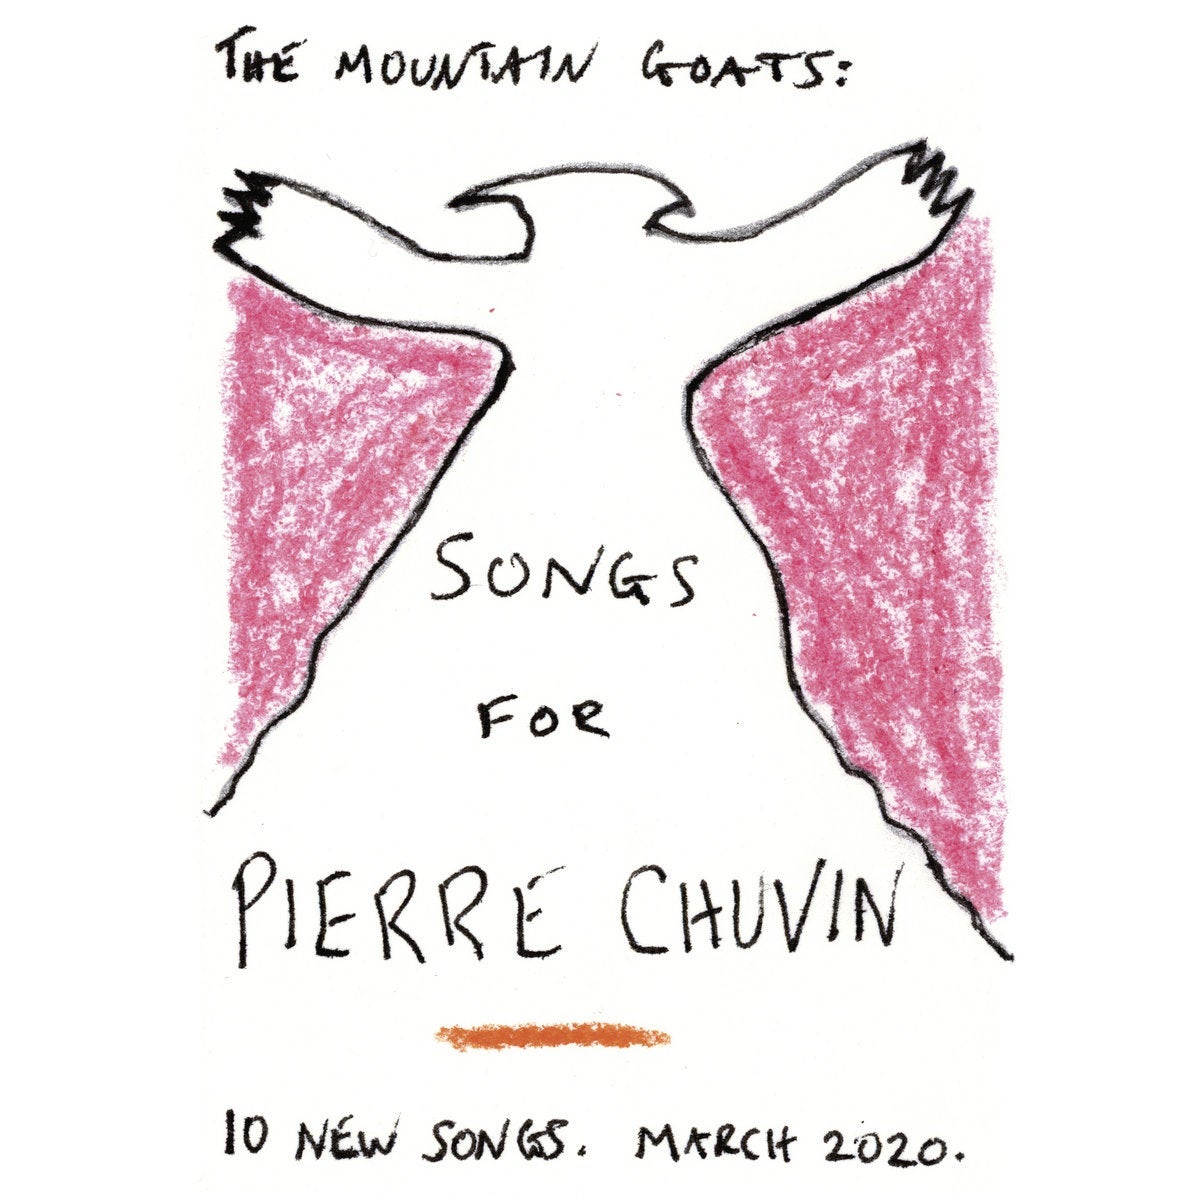 Cover of Songs for Pierre Chuvin.